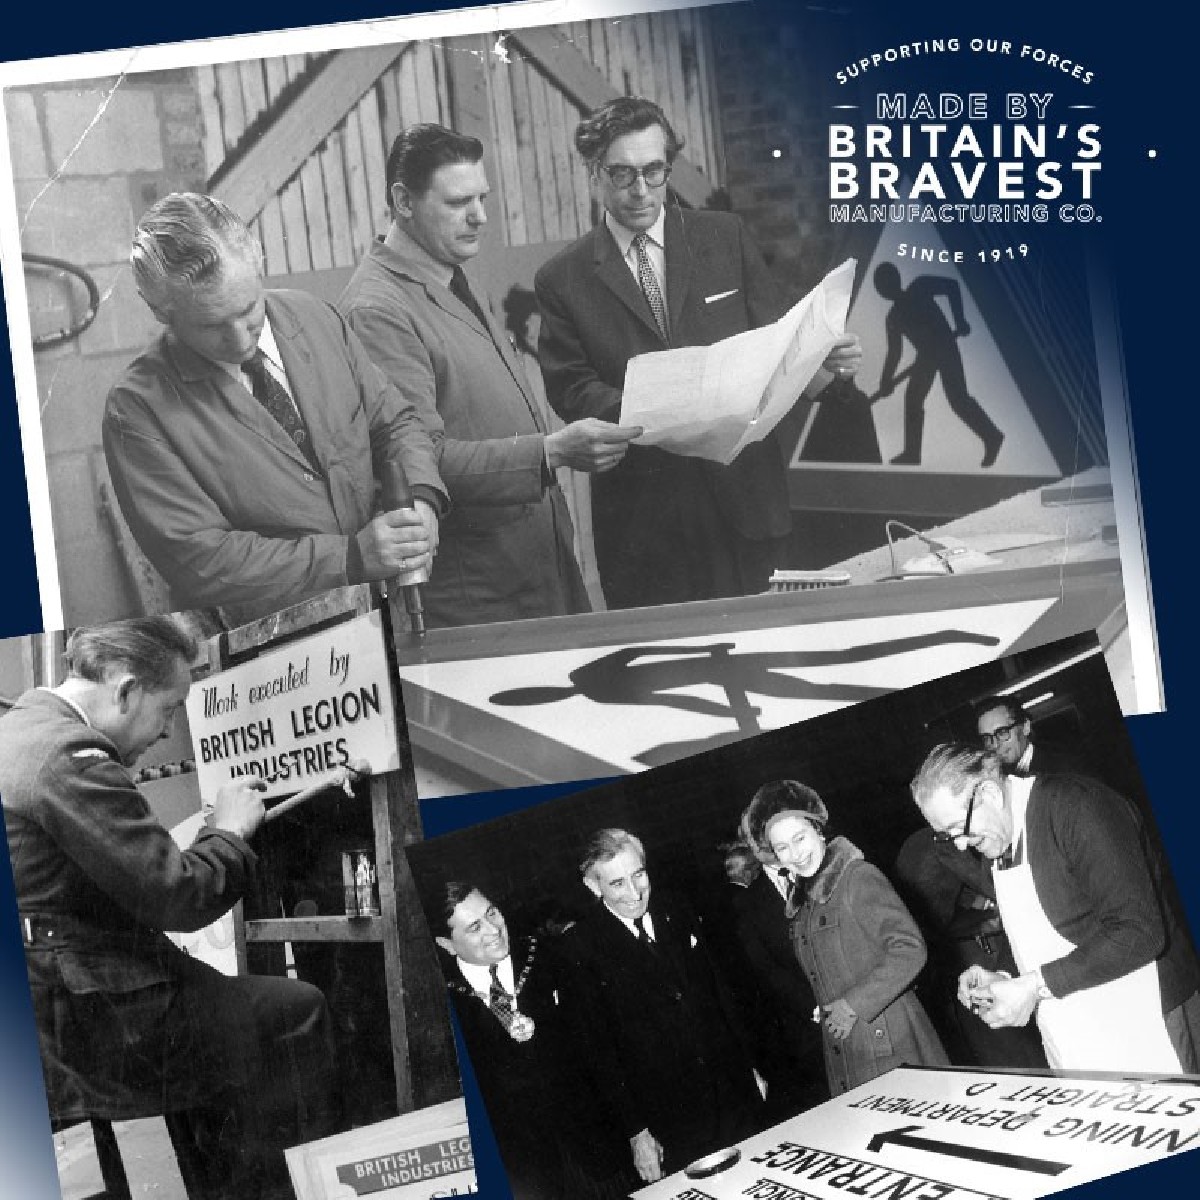 Since 1964, Britain’s Bravest Manufacturing Company - one of our social enterprise factories - has been making signage for road and rail along with many other applications. Learn more about the history of Britain’s Bravest Manufacturing Company here: brnw.ch/21wJjxx